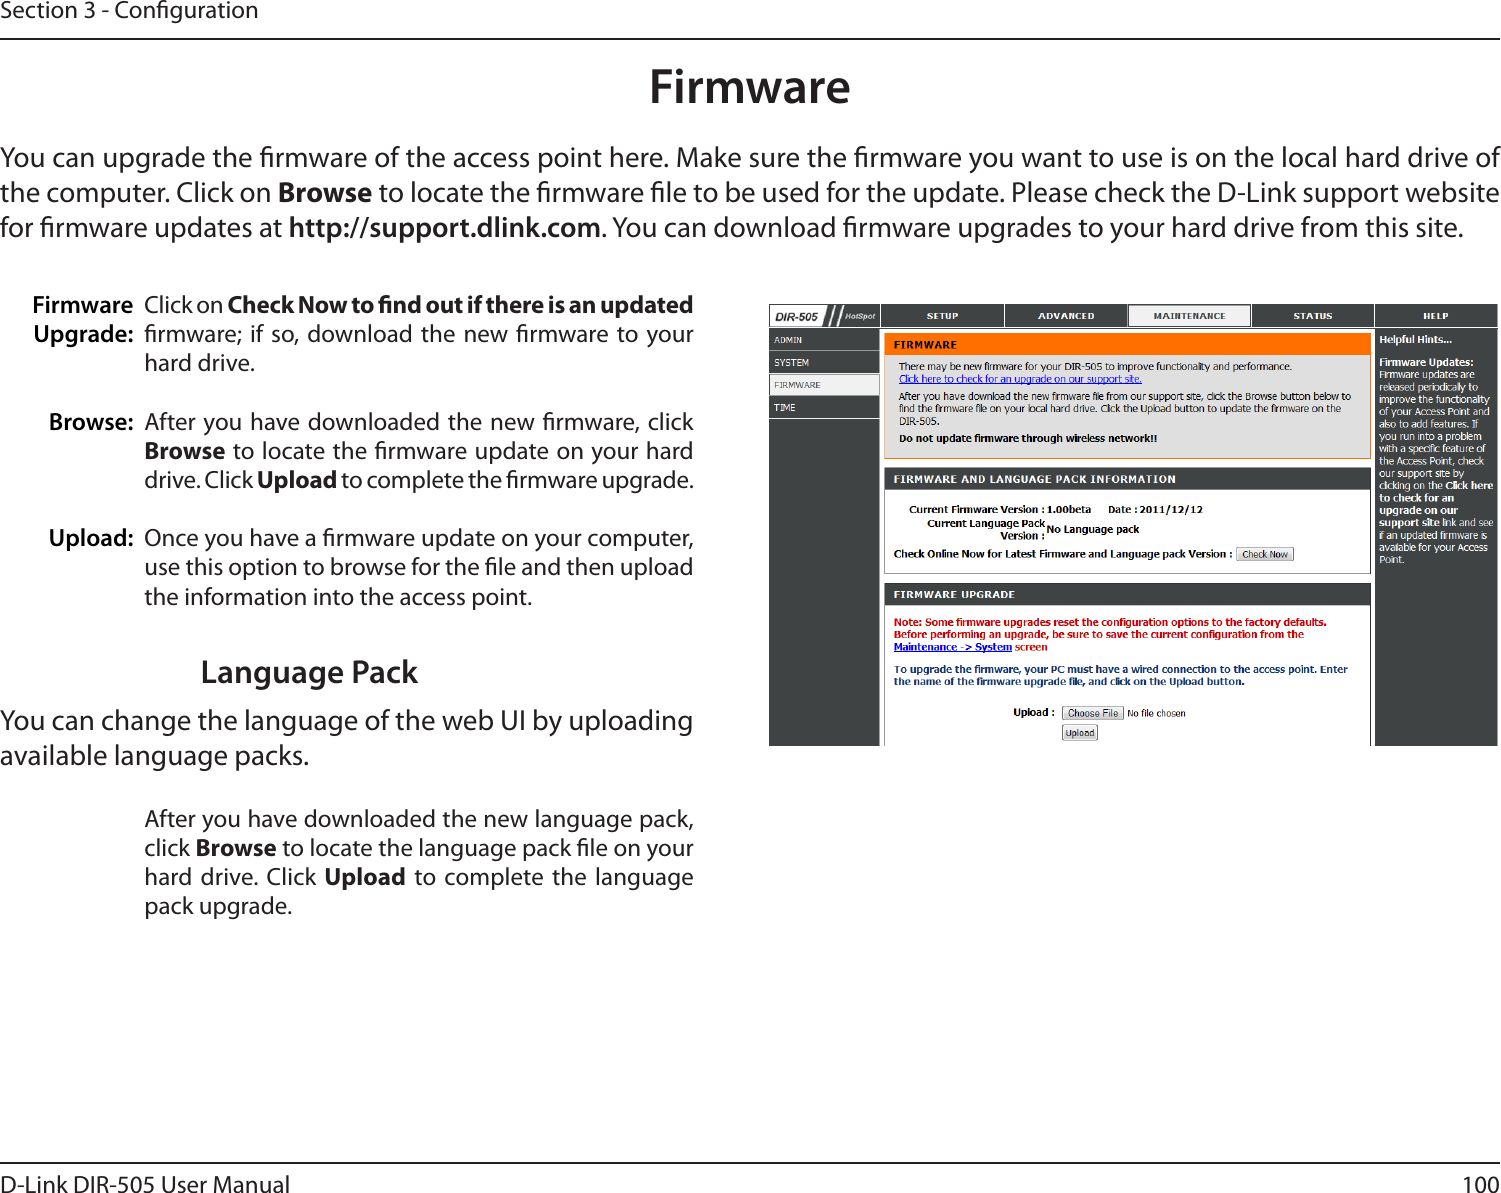 100D-Link DIR-505 User ManualSection 3 - CongurationFirmwareFirmwareUpgrade: Browse:Upload:Click on Check Now to nd out if there is an updated rmware; if  so, download the new rmware to your hard drive.After you have downloaded the new rmware, click Browse to locate the rmware update on your hard drive. Click Upload to complete the rmware upgrade.Once you have a rmware update on your computer, use this option to browse for the le and then upload the information into the access point. You can upgrade the rmware of the access point here. Make sure the rmware you want to use is on the local hard drive of the computer. Click on Browse to locate the rmware le to be used for the update. Please check the D-Link support website for rmware updates at http://support.dlink.com. You can download rmware upgrades to your hard drive from this site.After you have downloaded the new language pack, click Browse to locate the language pack le on your hard drive. Click  Upload to complete the language pack upgrade.Language PackYou can change the language of the web UI by uploading available language packs.